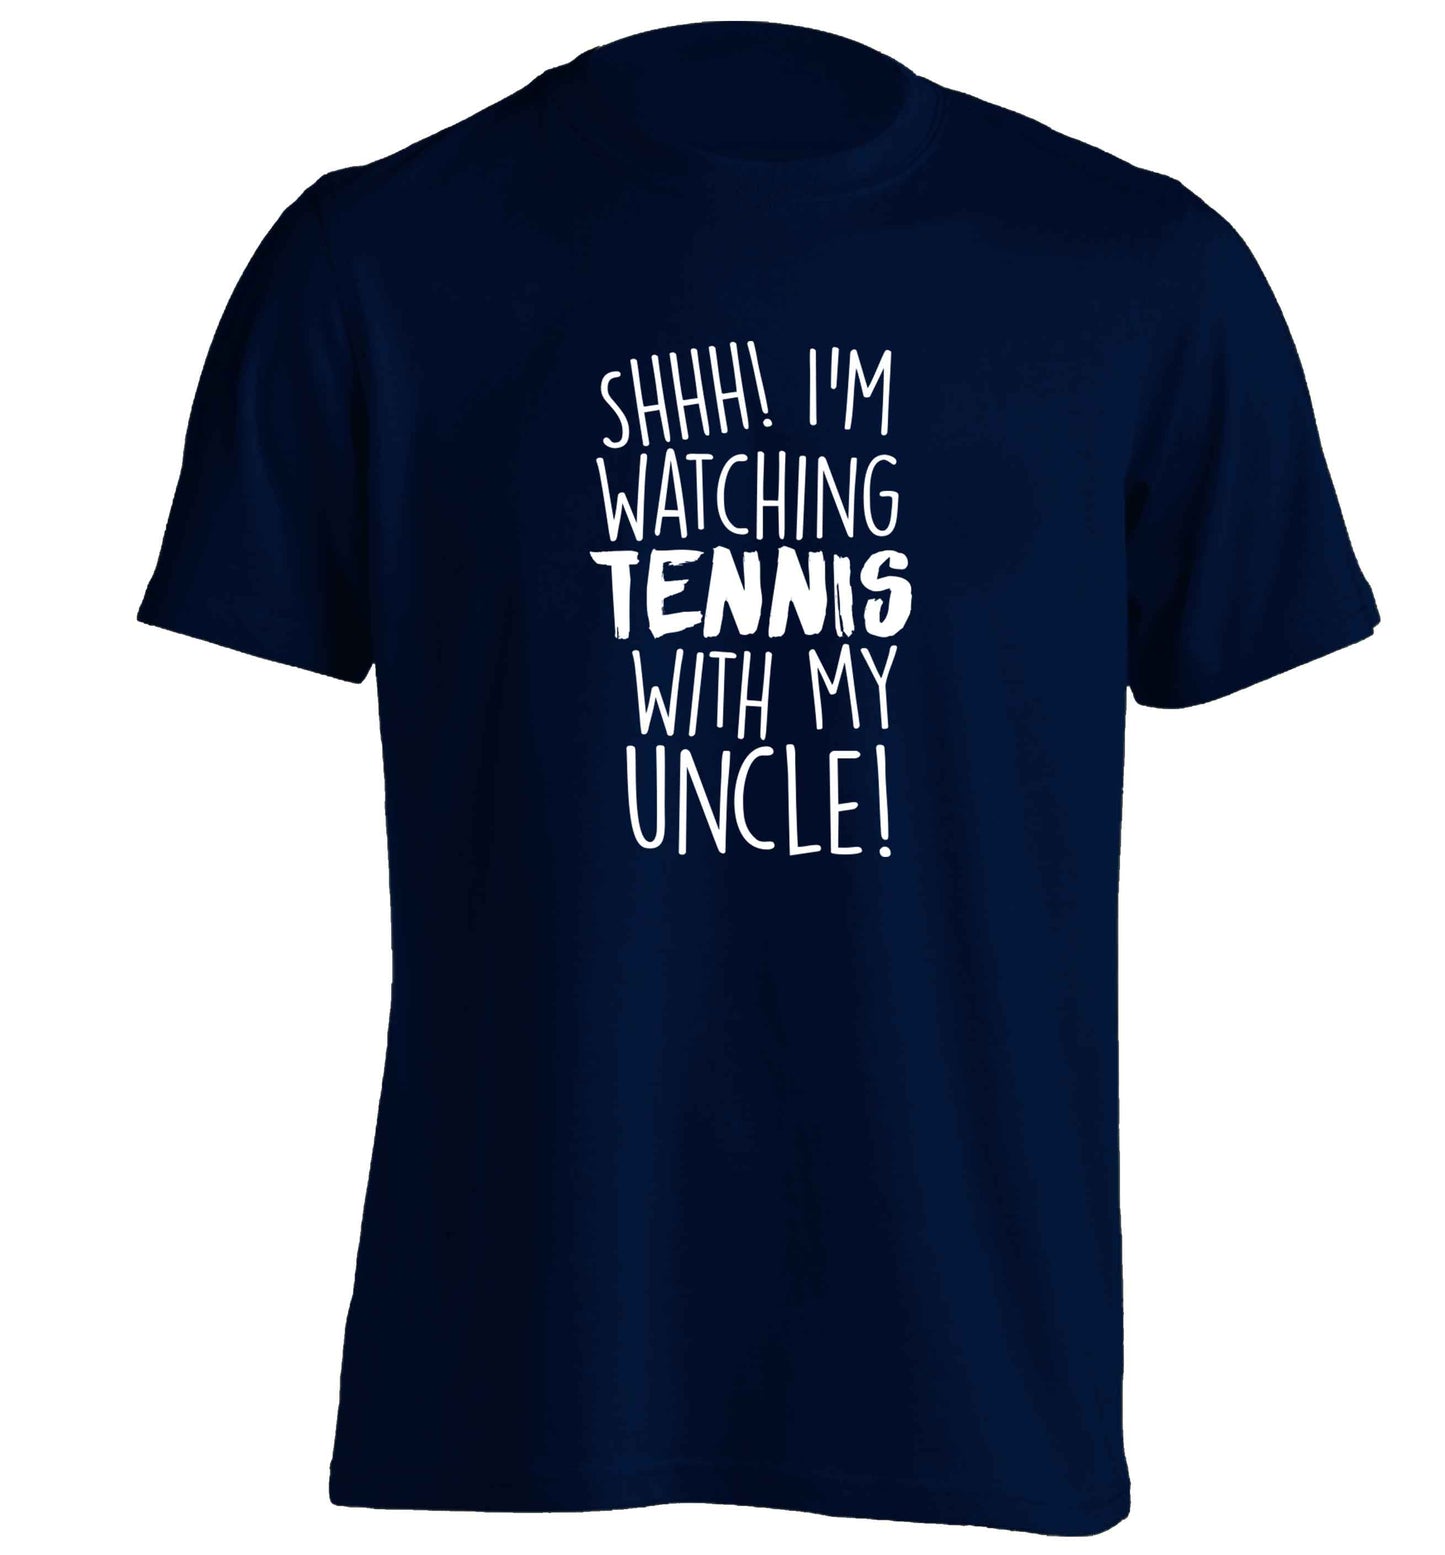 Shh! I'm watching tennis with my uncle! adults unisex navy Tshirt 2XL